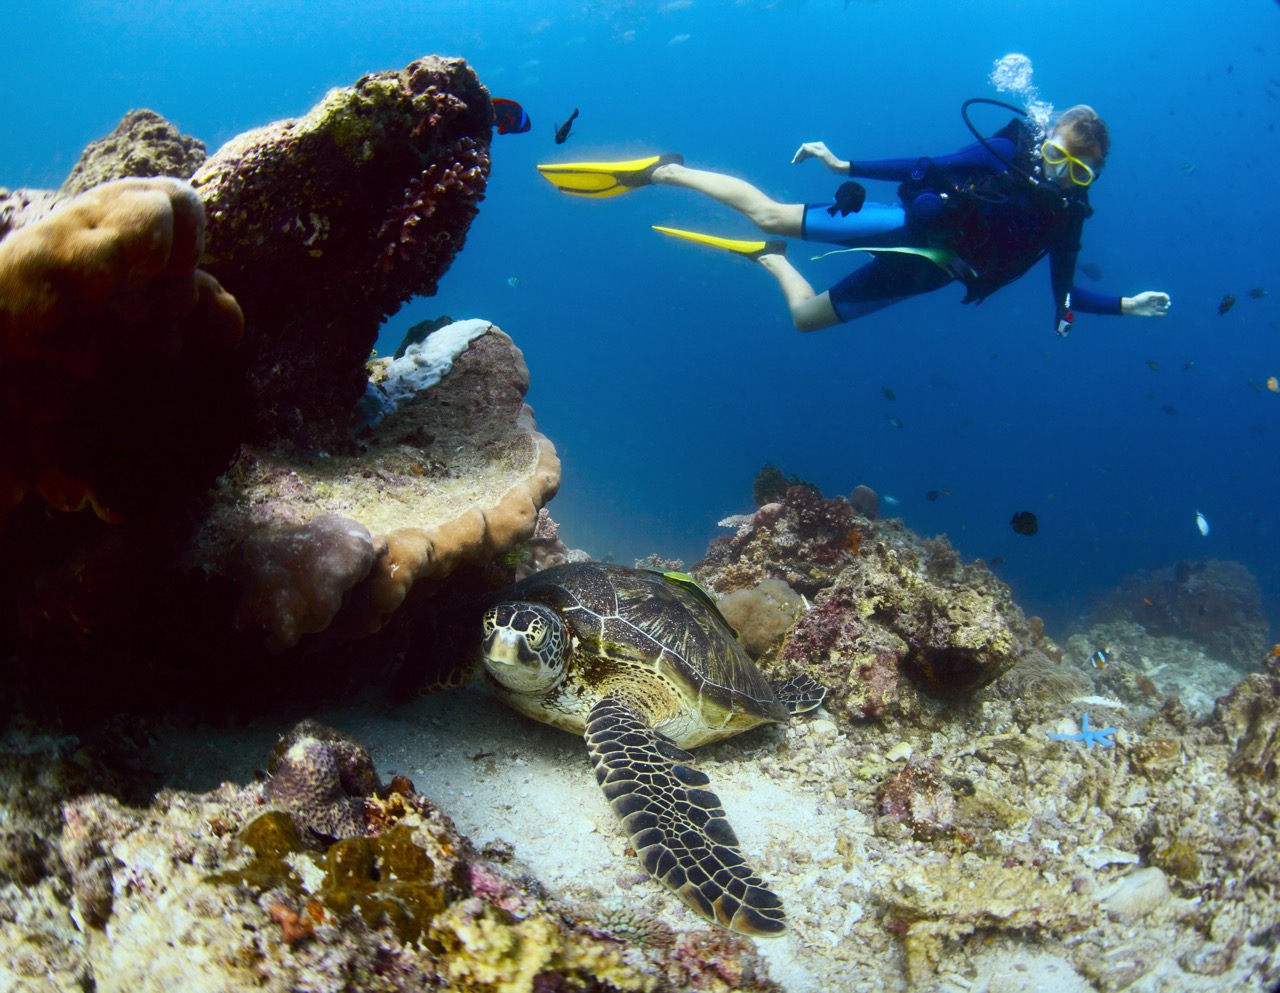 responsible interactions with marine life as shown by a scuba diver an an endangered sea turtle